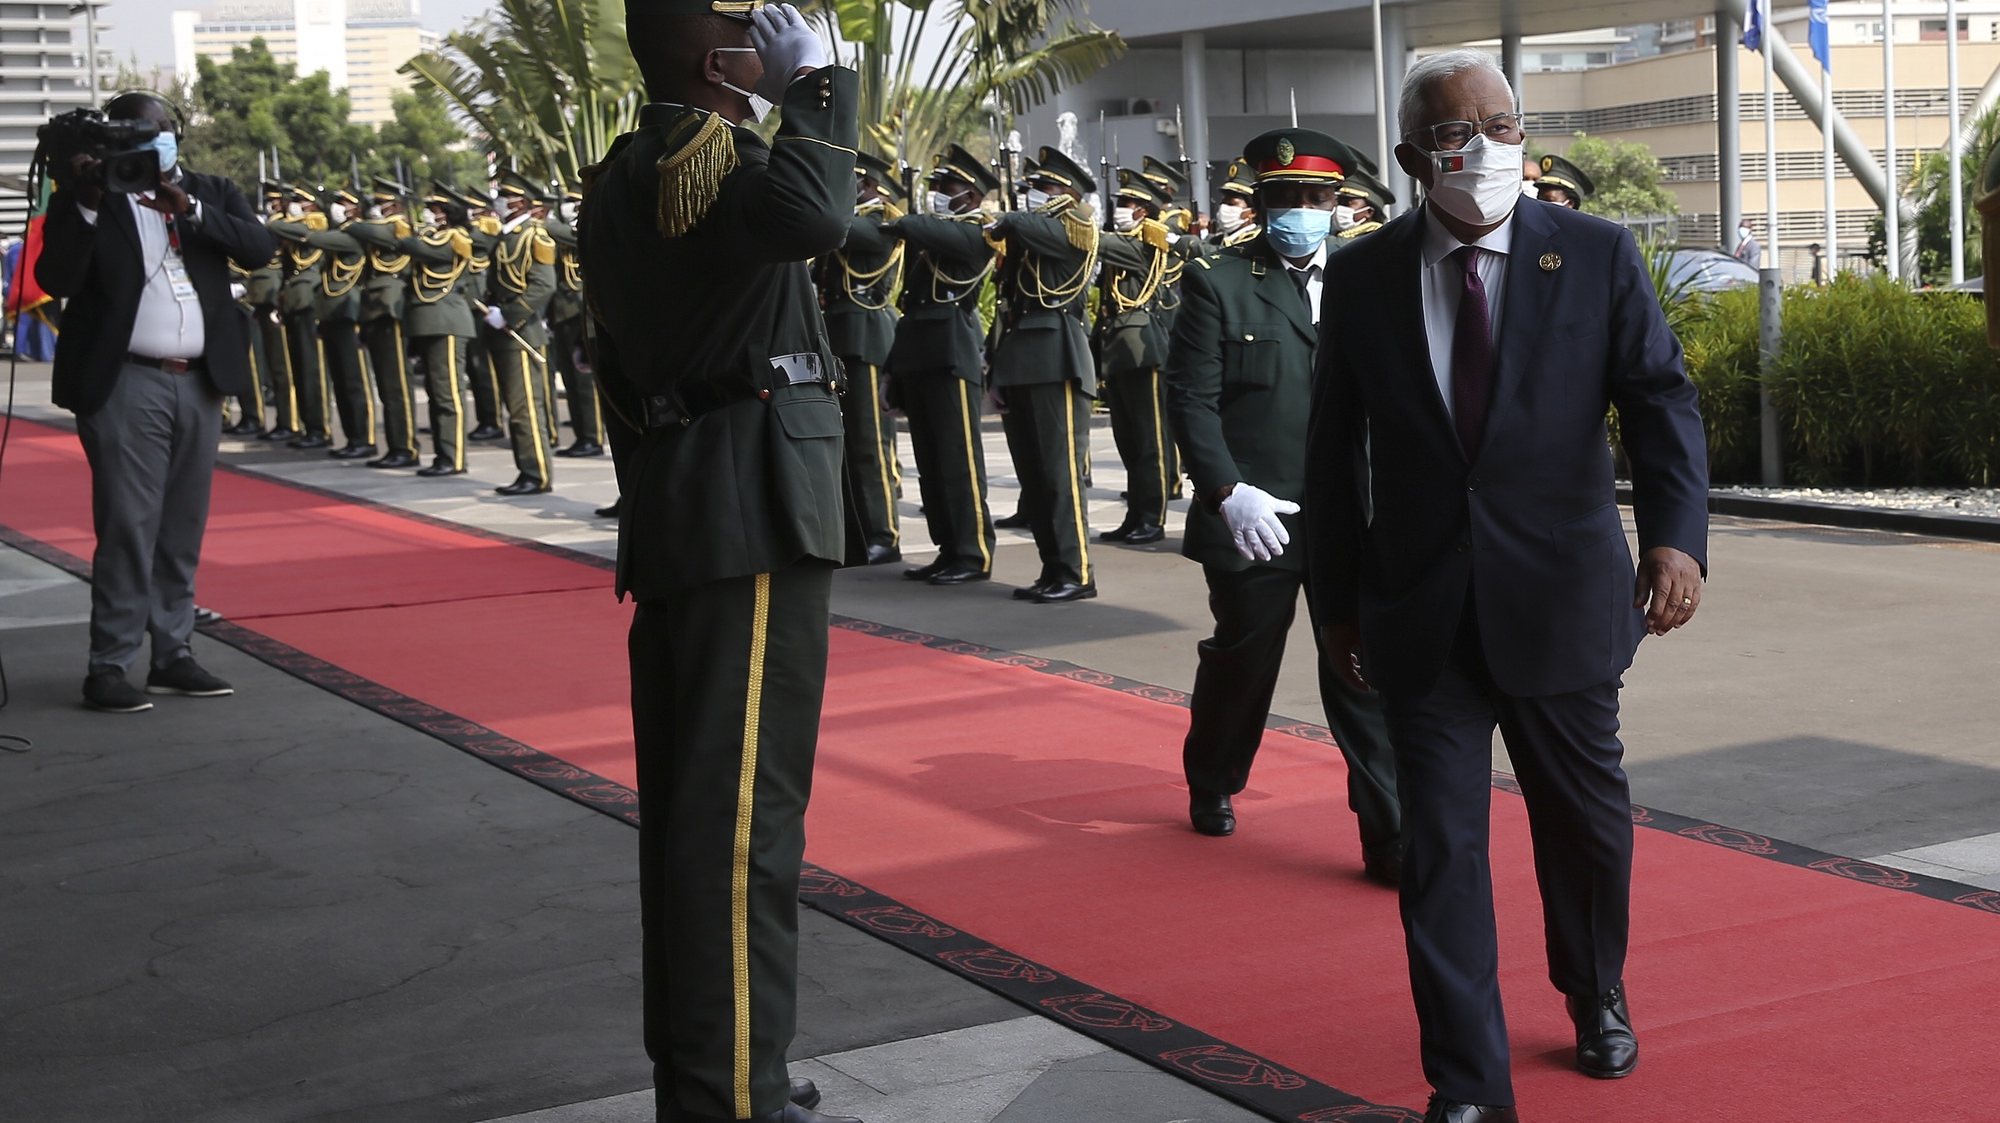 Portuguese Prime Minister Antonio Costa (R) arrive to participate in the 13th Conference of Heads of State and Government of the Community of Portuguese-speaking Countries (CPLP), in Luanda, Angola, 17 July 2021. AMPE ROGERIO/LUSA